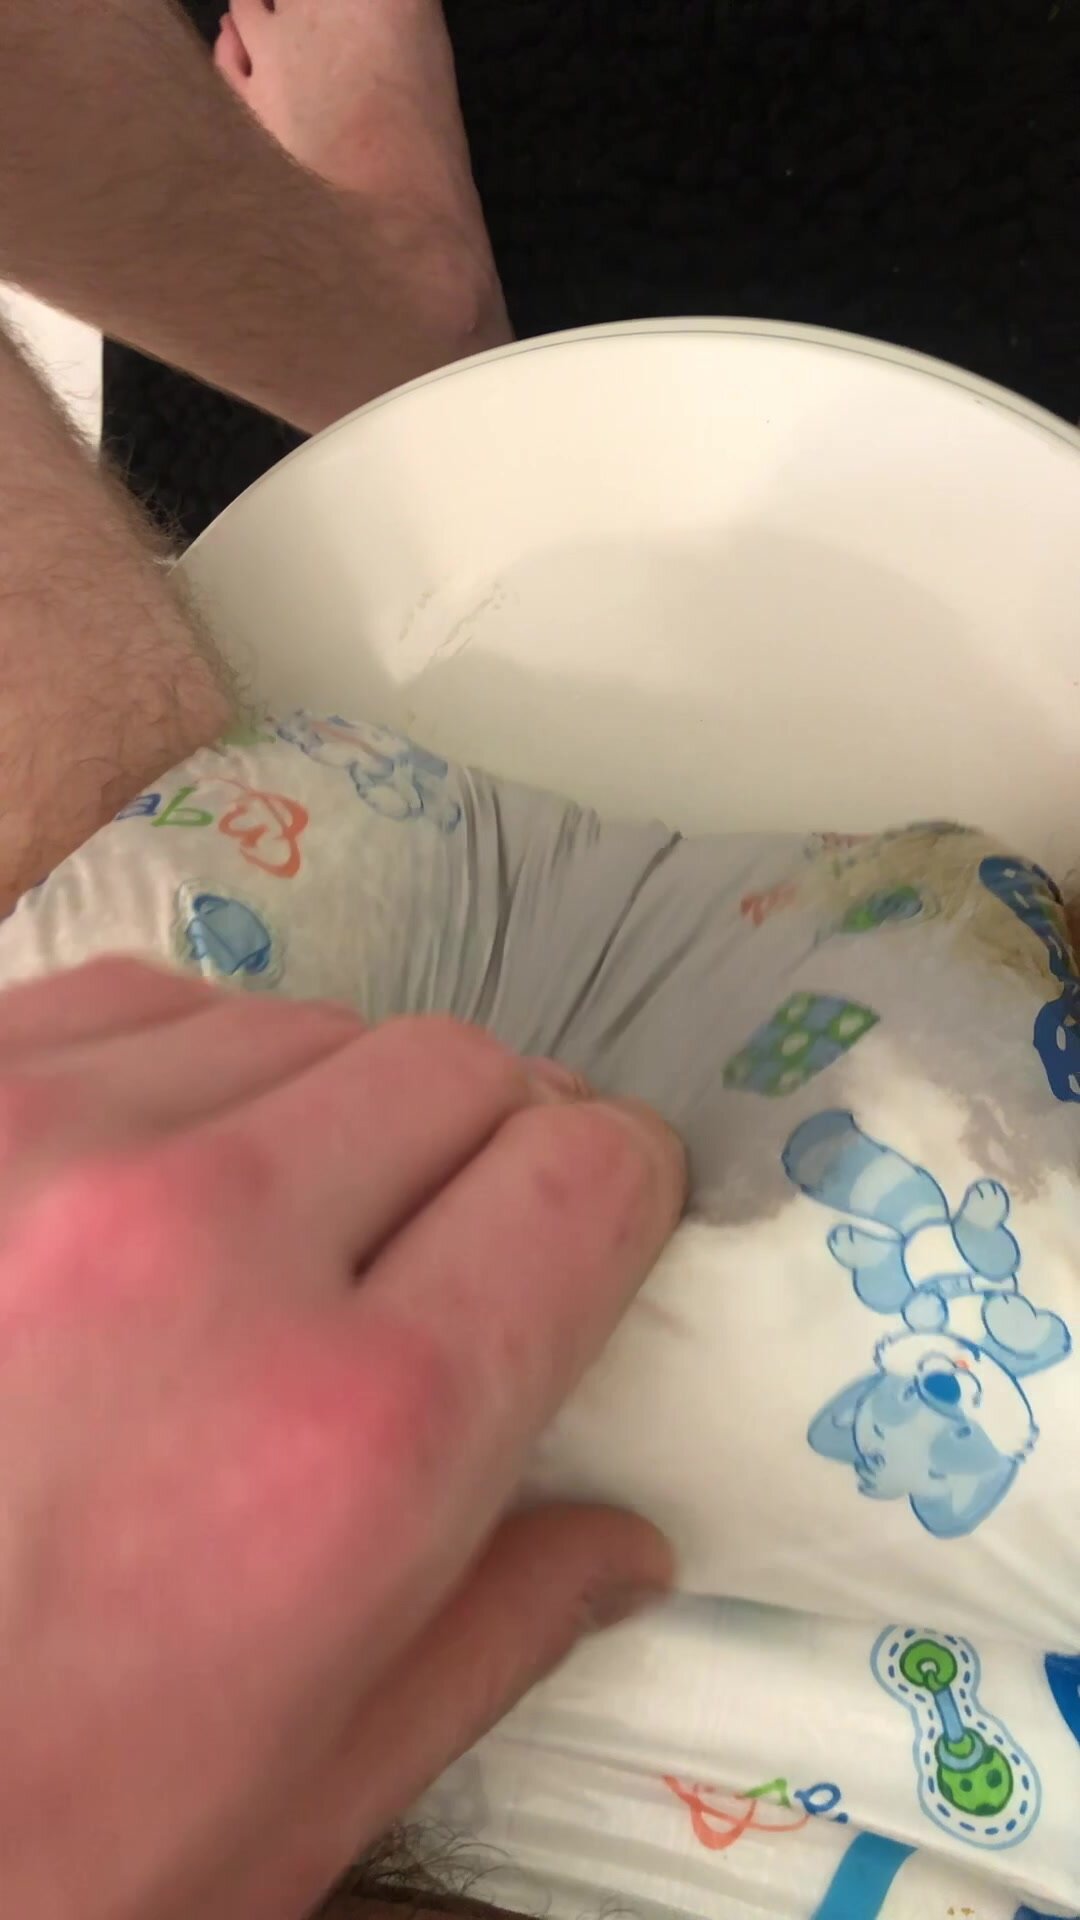 Horny twink squishes his messy diaper